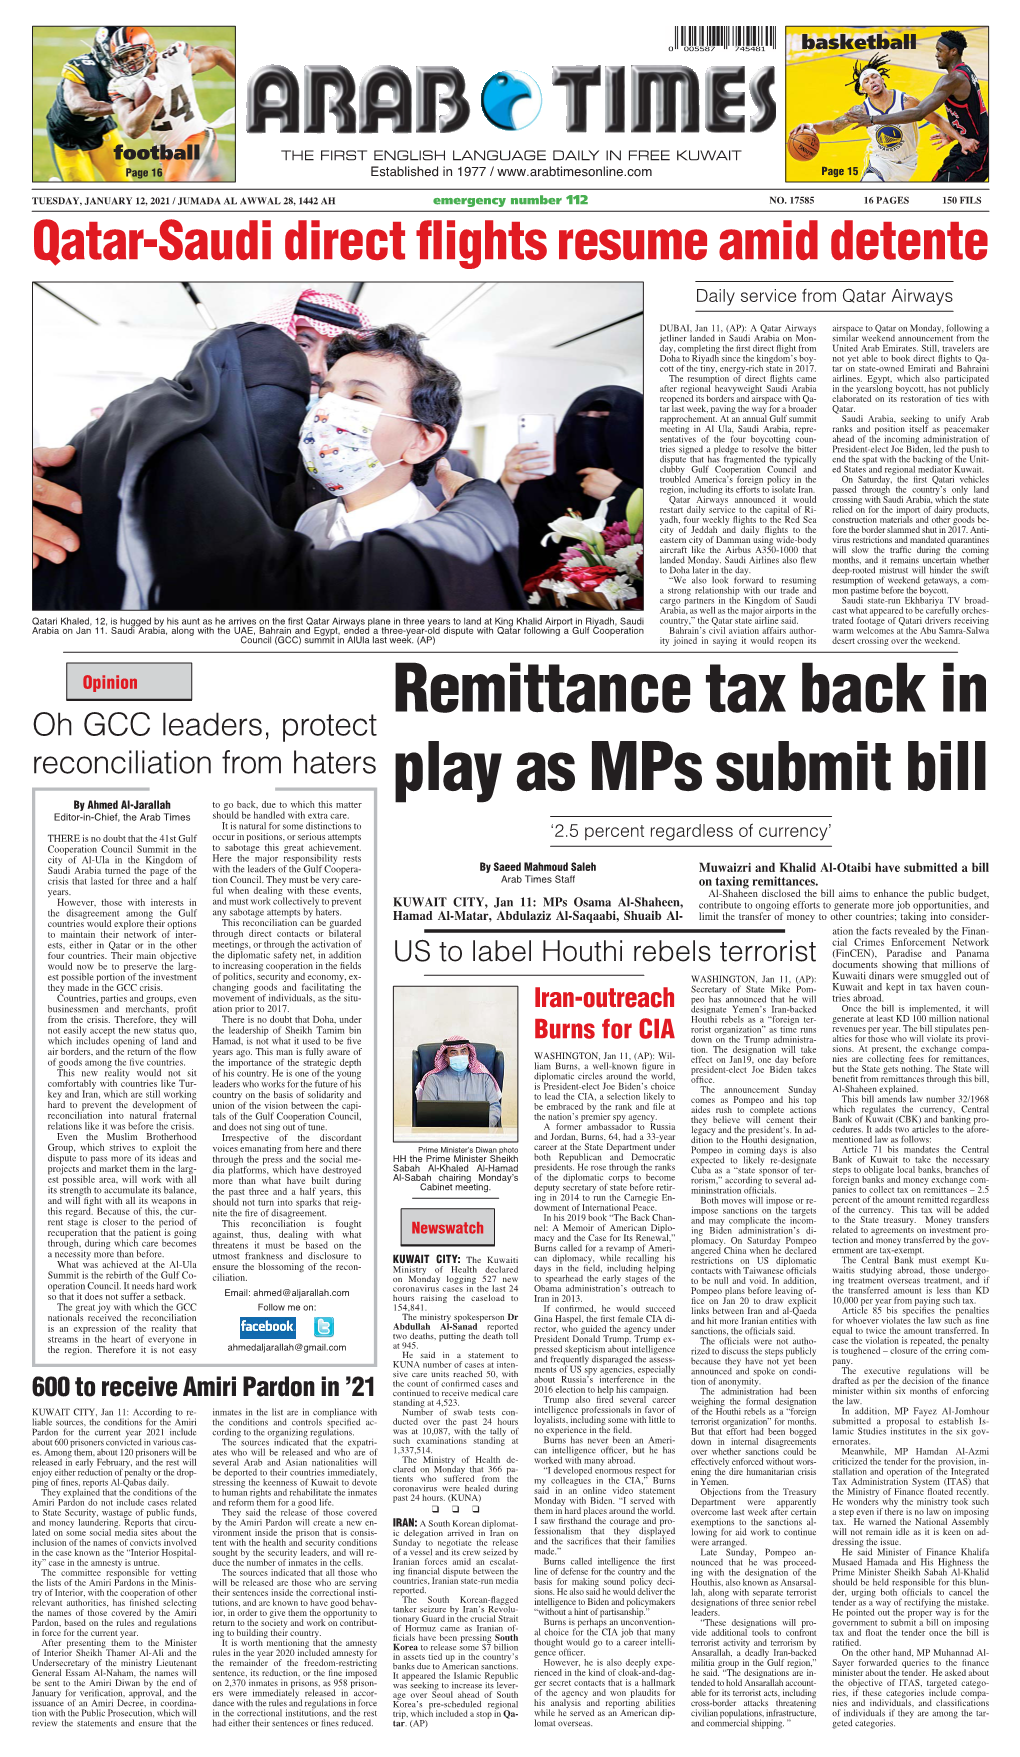 Remittance Tax Back in Play As Mps Submit Bill